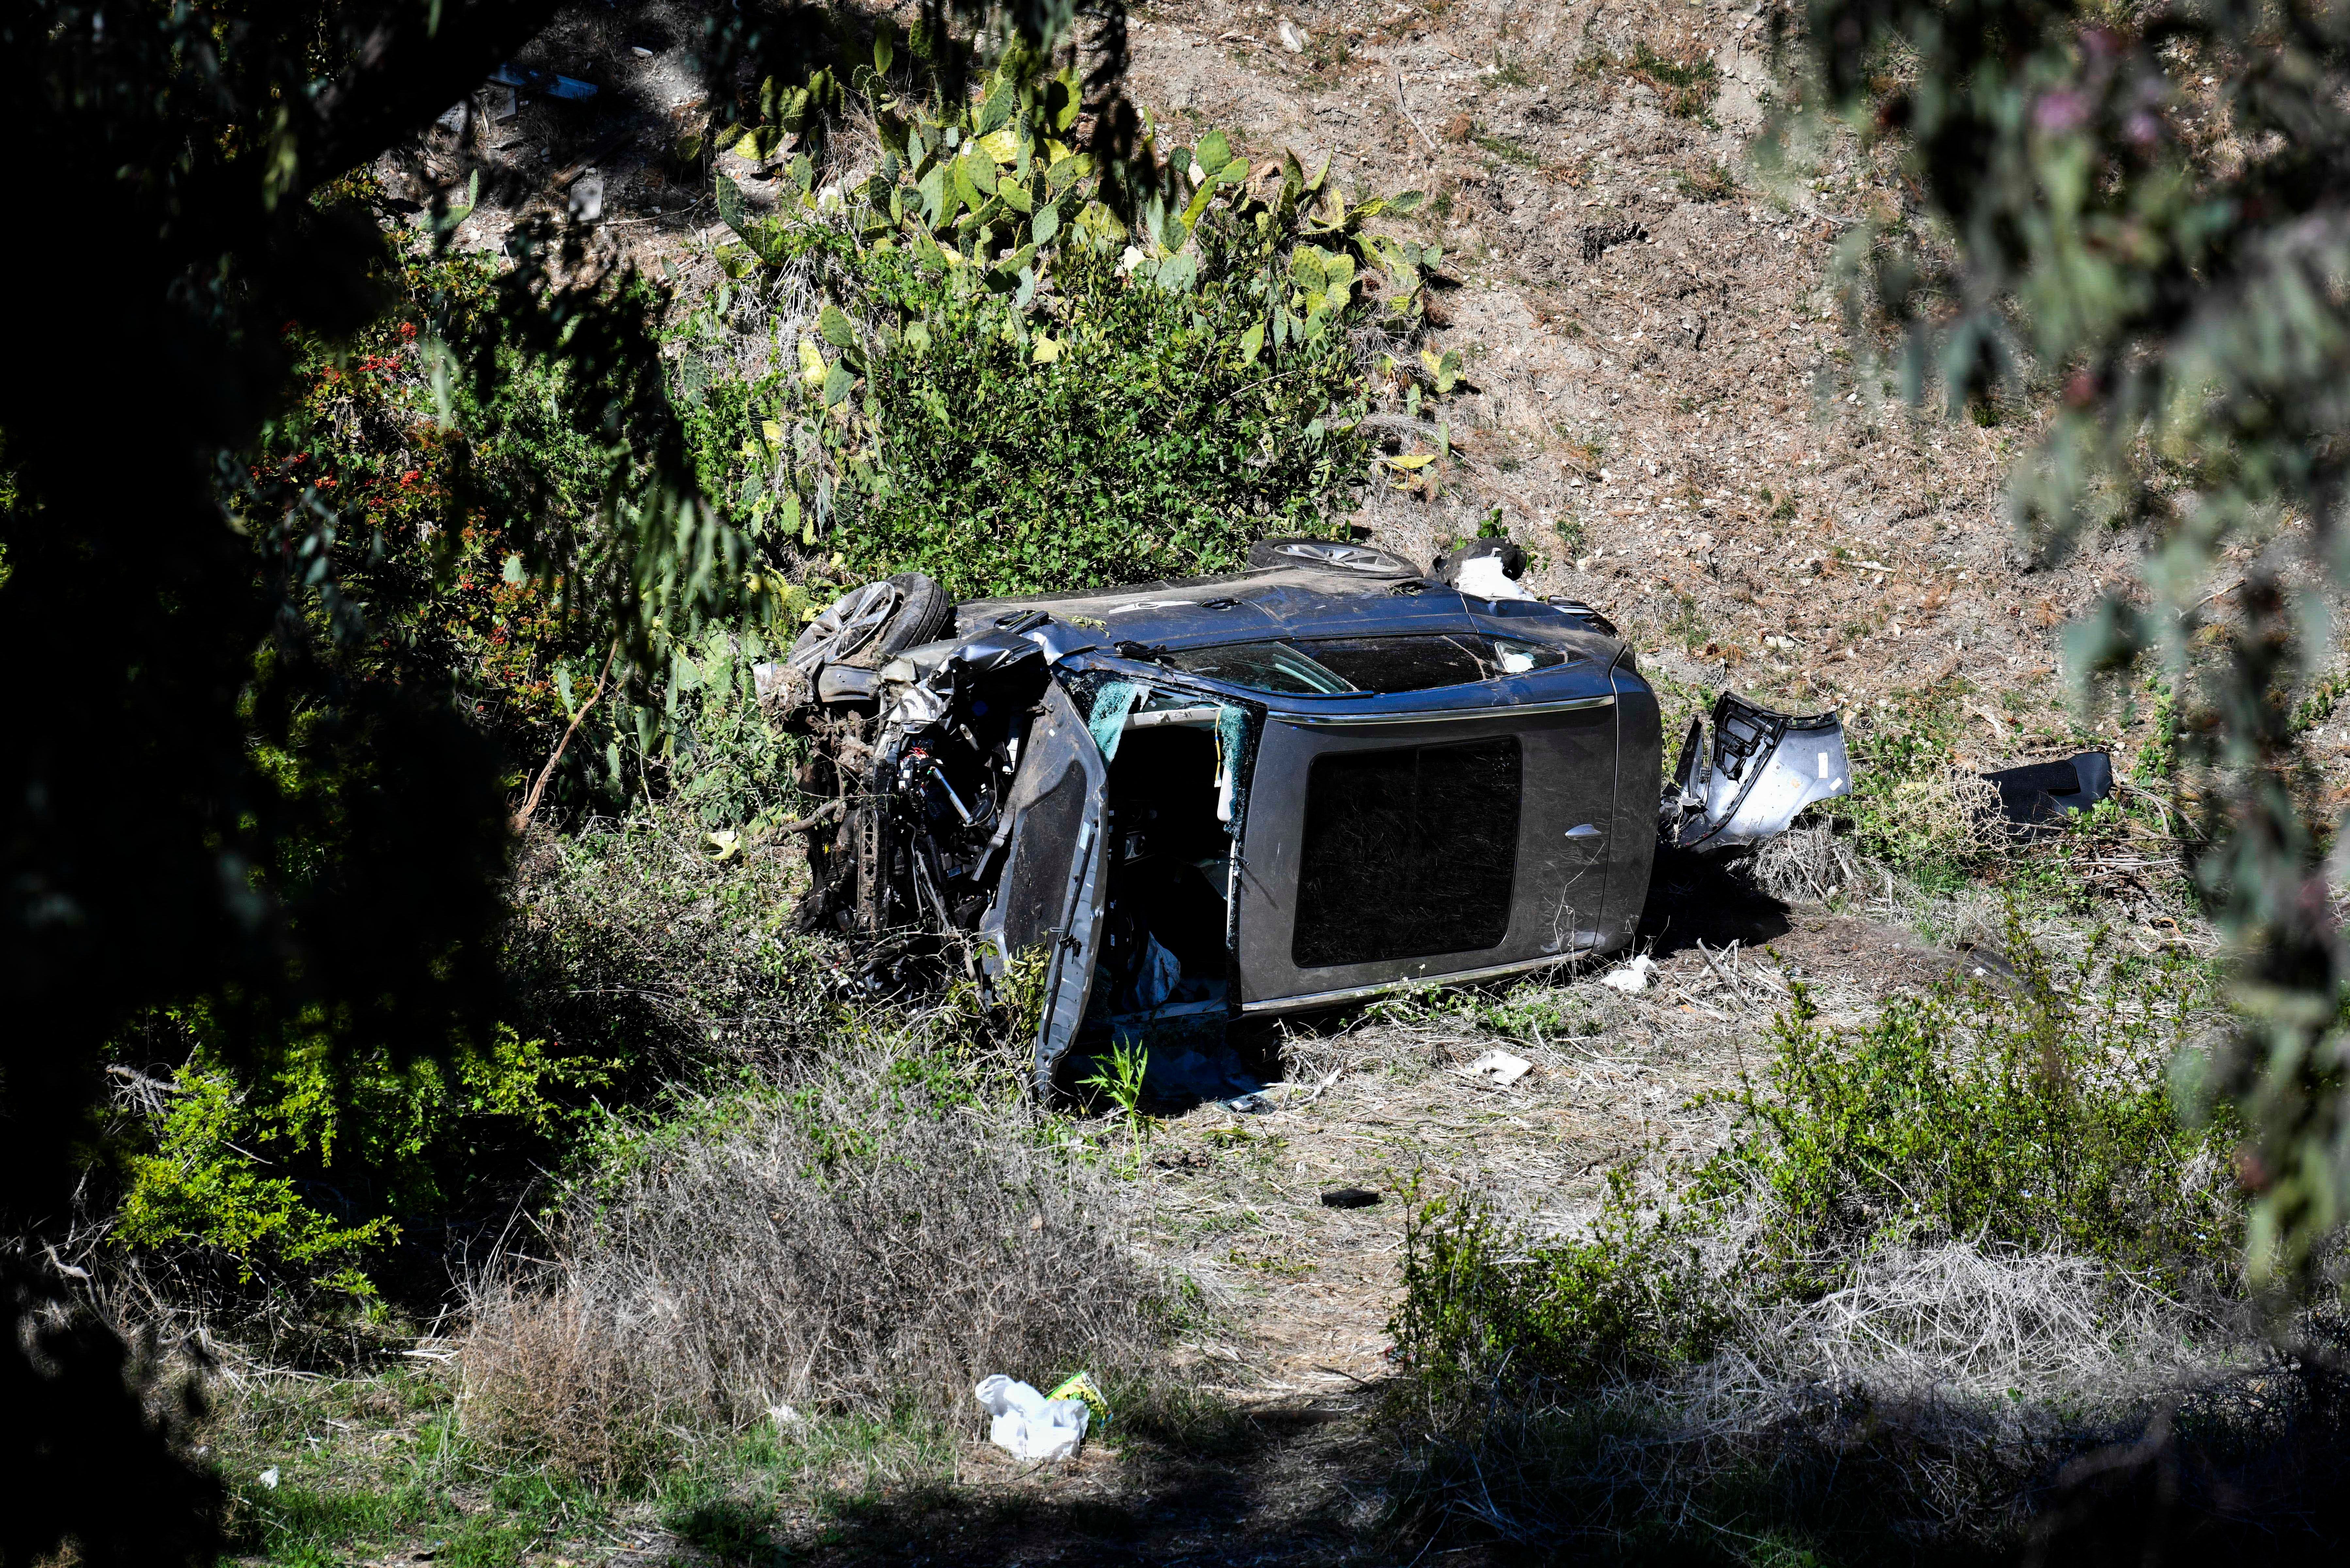 Tiger Woods' vehicle wrecked in Rancho Palos Verdes, Calif.